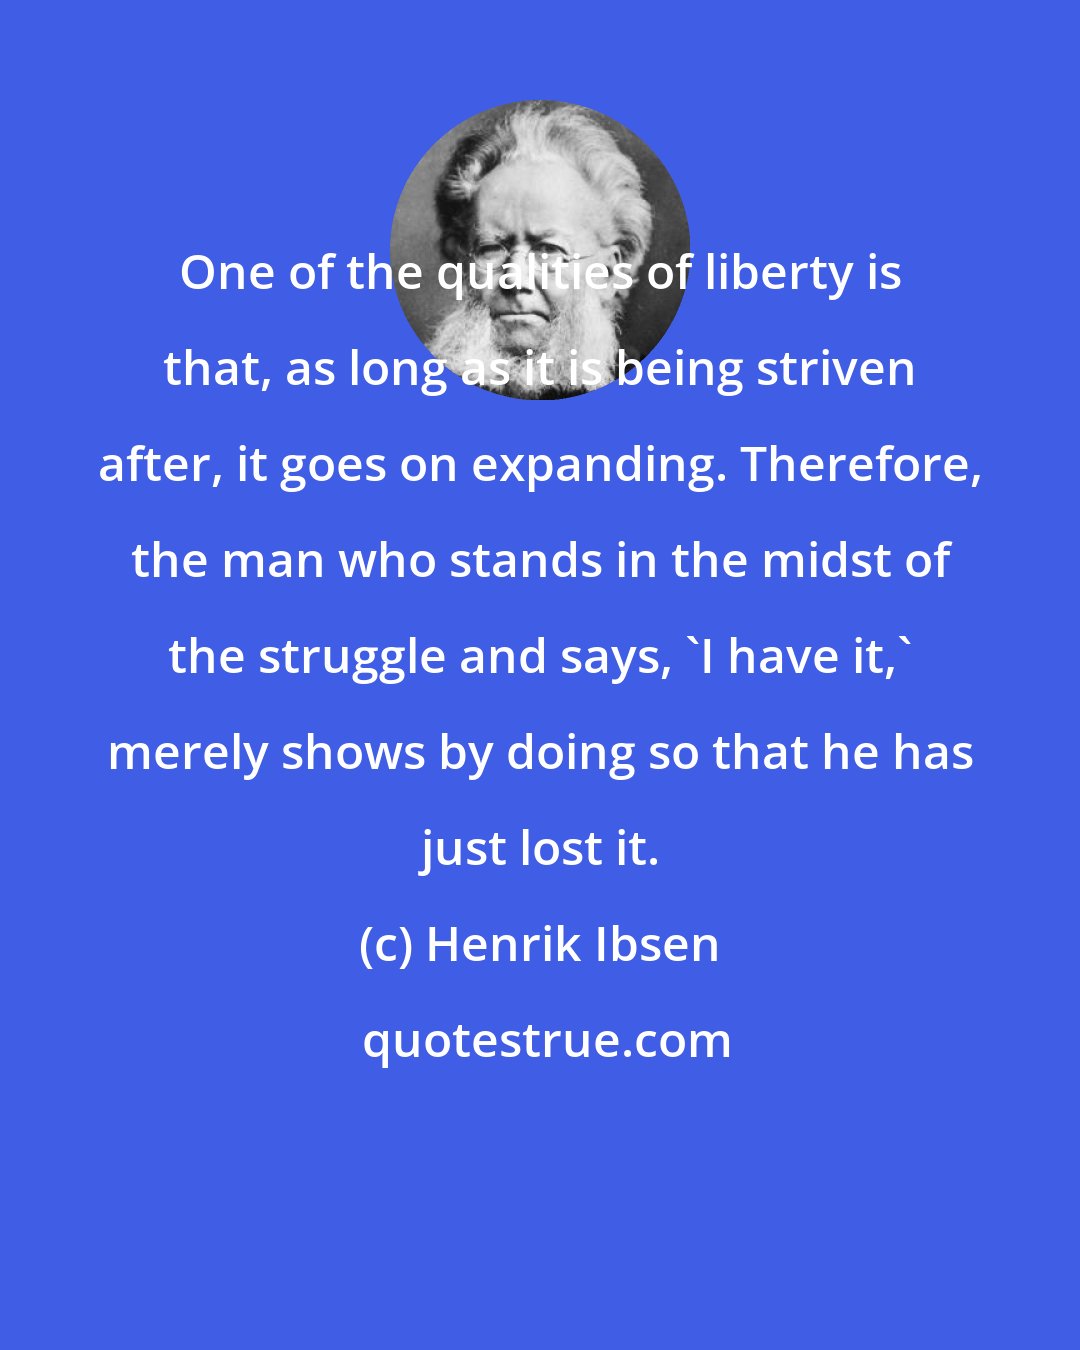 Henrik Ibsen: One of the qualities of liberty is that, as long as it is being striven after, it goes on expanding. Therefore, the man who stands in the midst of the struggle and says, 'I have it,' merely shows by doing so that he has just lost it.